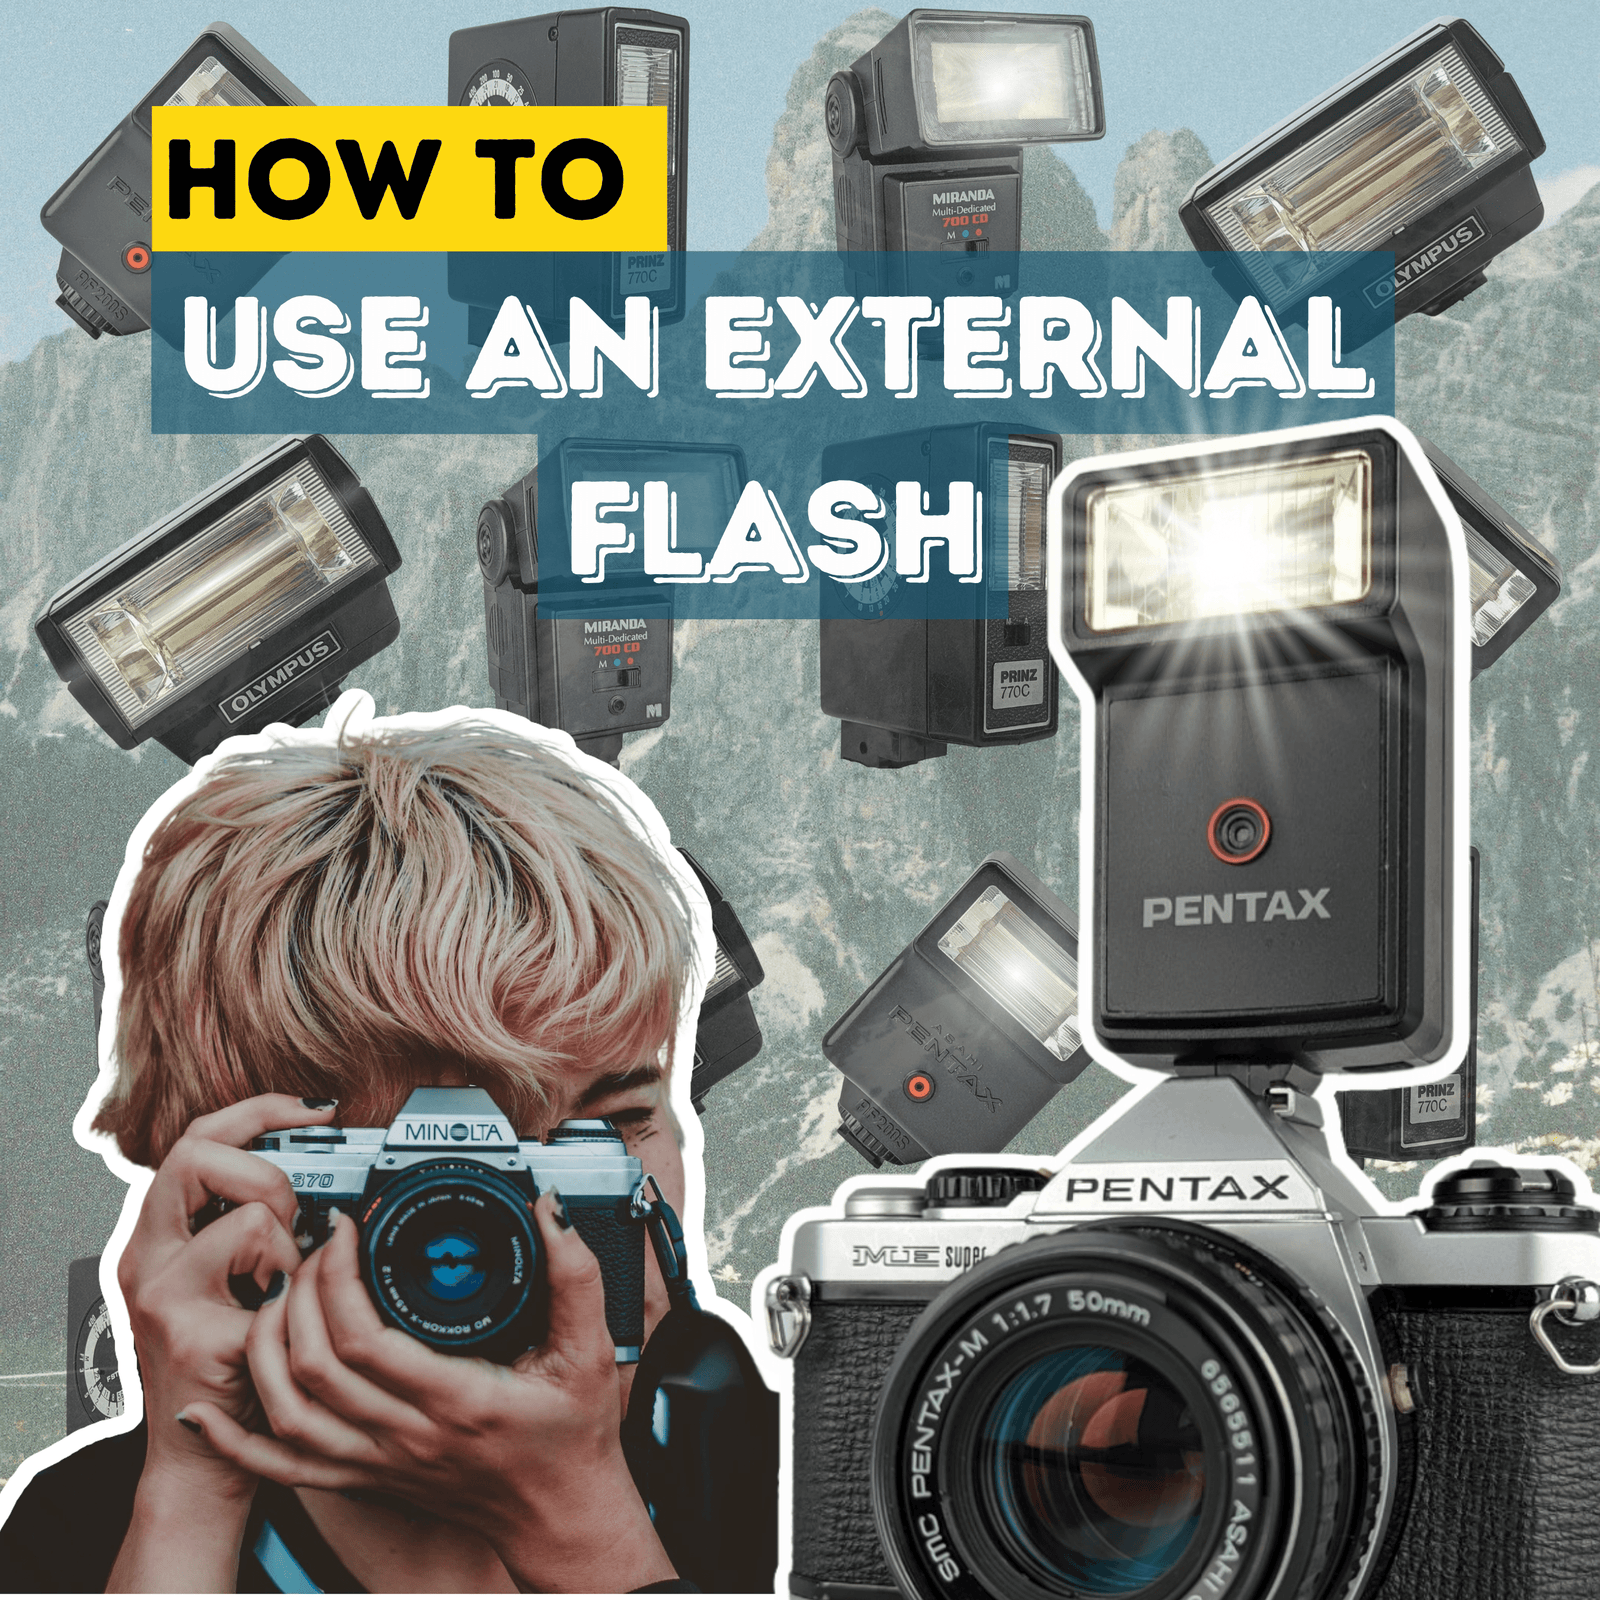 How To: Use an External Flash